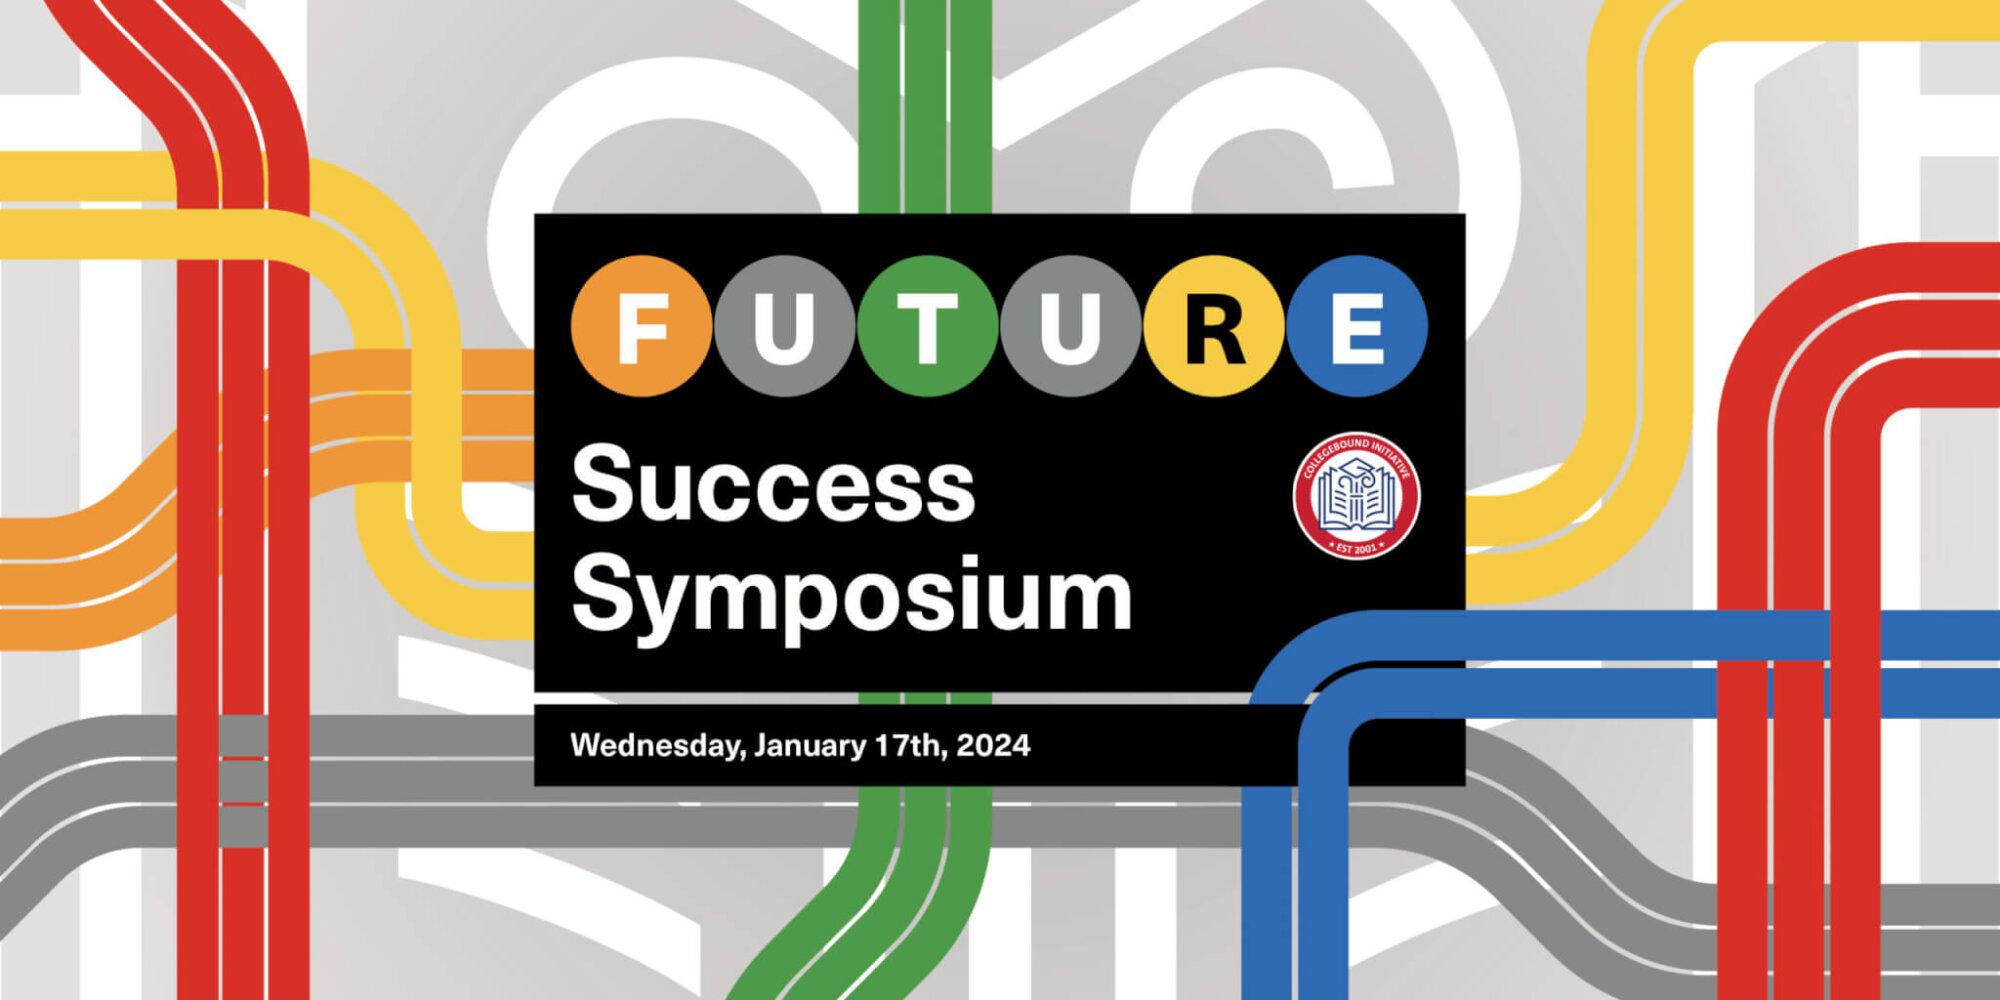 Colorful intersecting train lines surround a subway sign "Future Success Symposium"